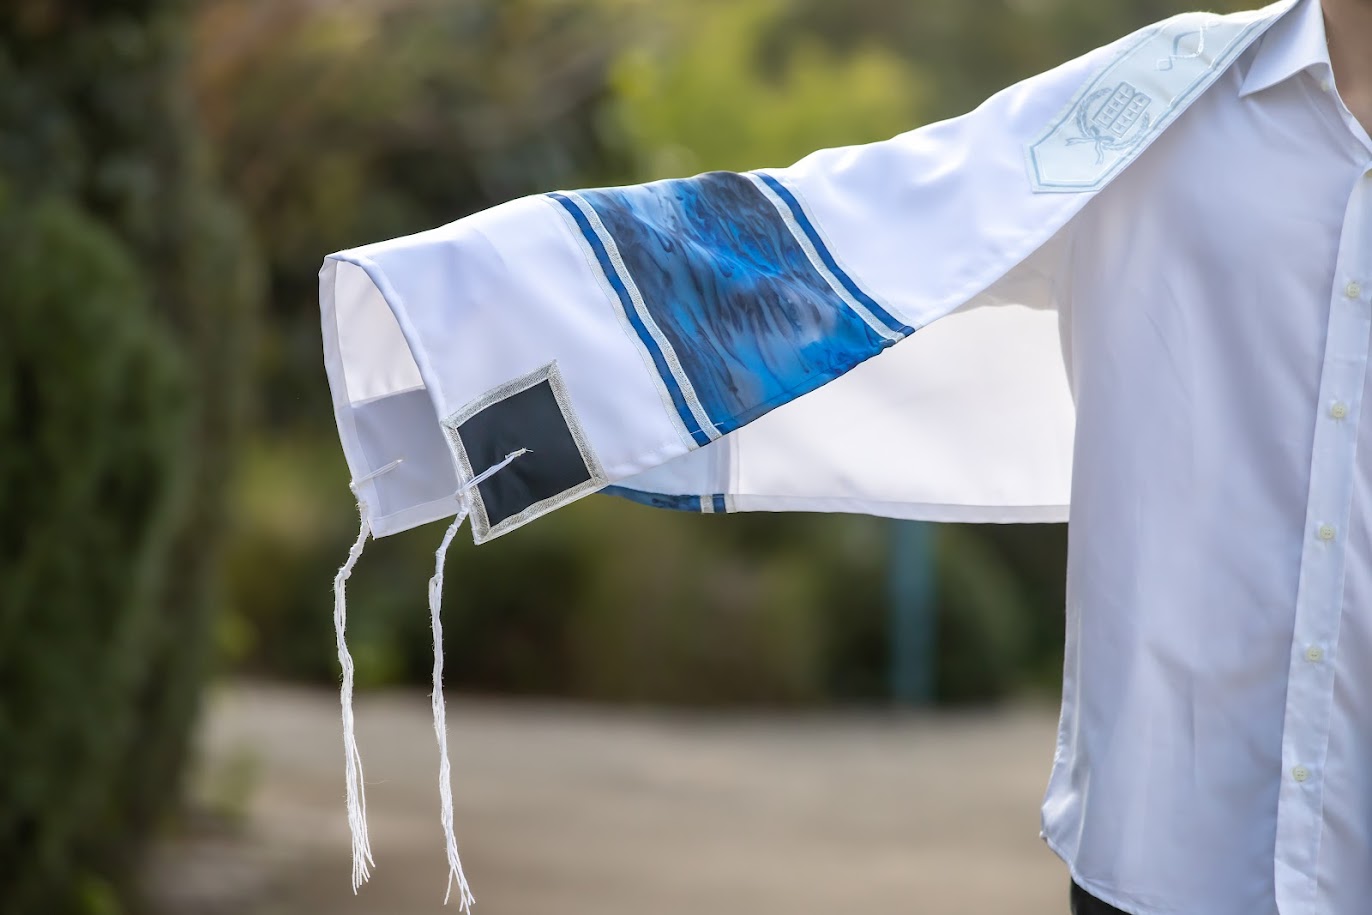 blue tallit Available in distinct geometric patterns and floral motifs, the exclusive collection of blue tallit from Galilee Silks, the famous Israeli Tallit designer, has all that you need! For more visit: https://www.galileesilks.com/collections/bar-mitzvah-tallit by amramrafi